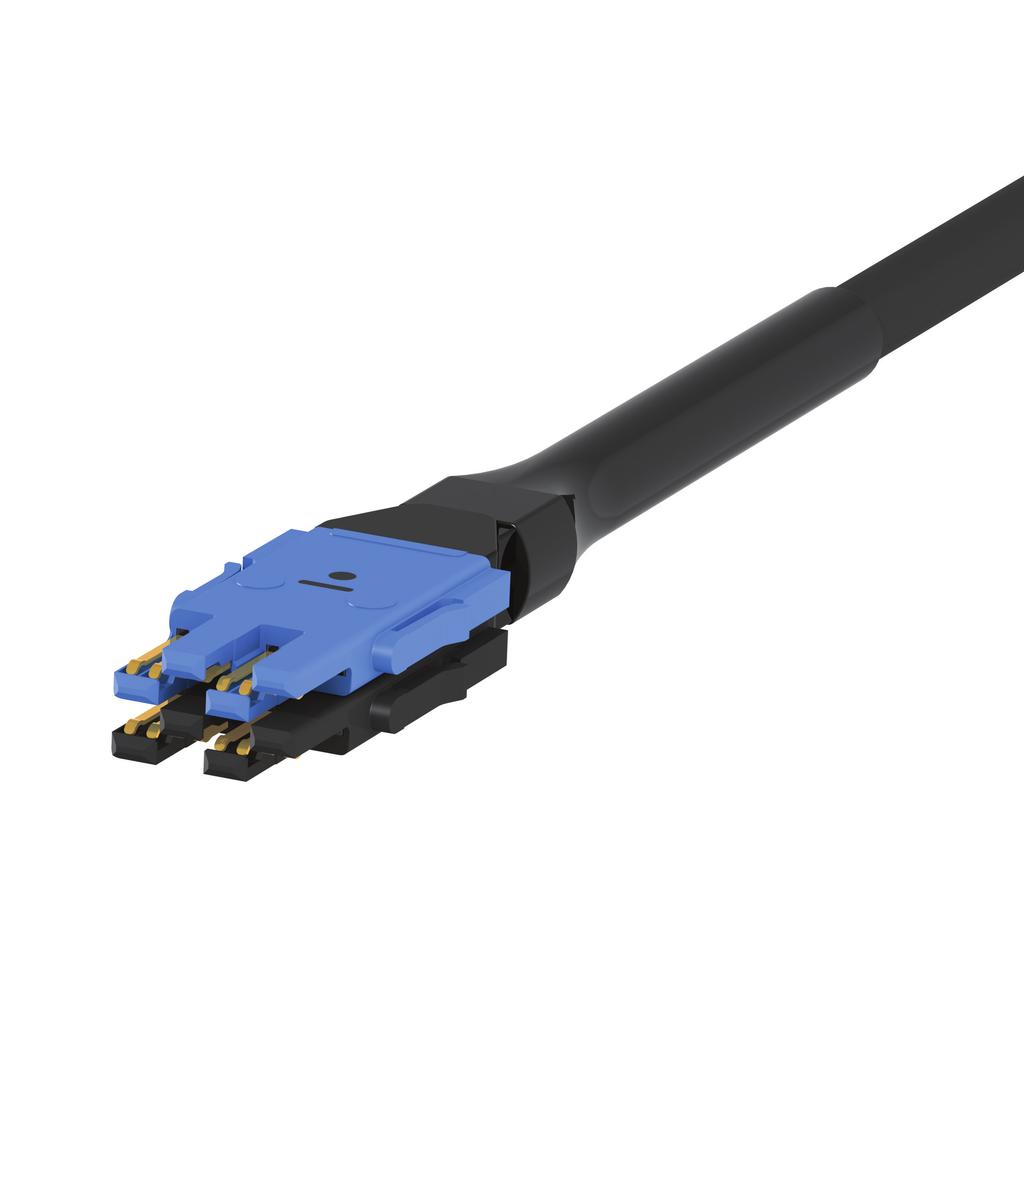 HIGH SPEED DIGITAL PATCHCORDS The original VTAC. These patchcords are renowned for their signal integrity and speed.